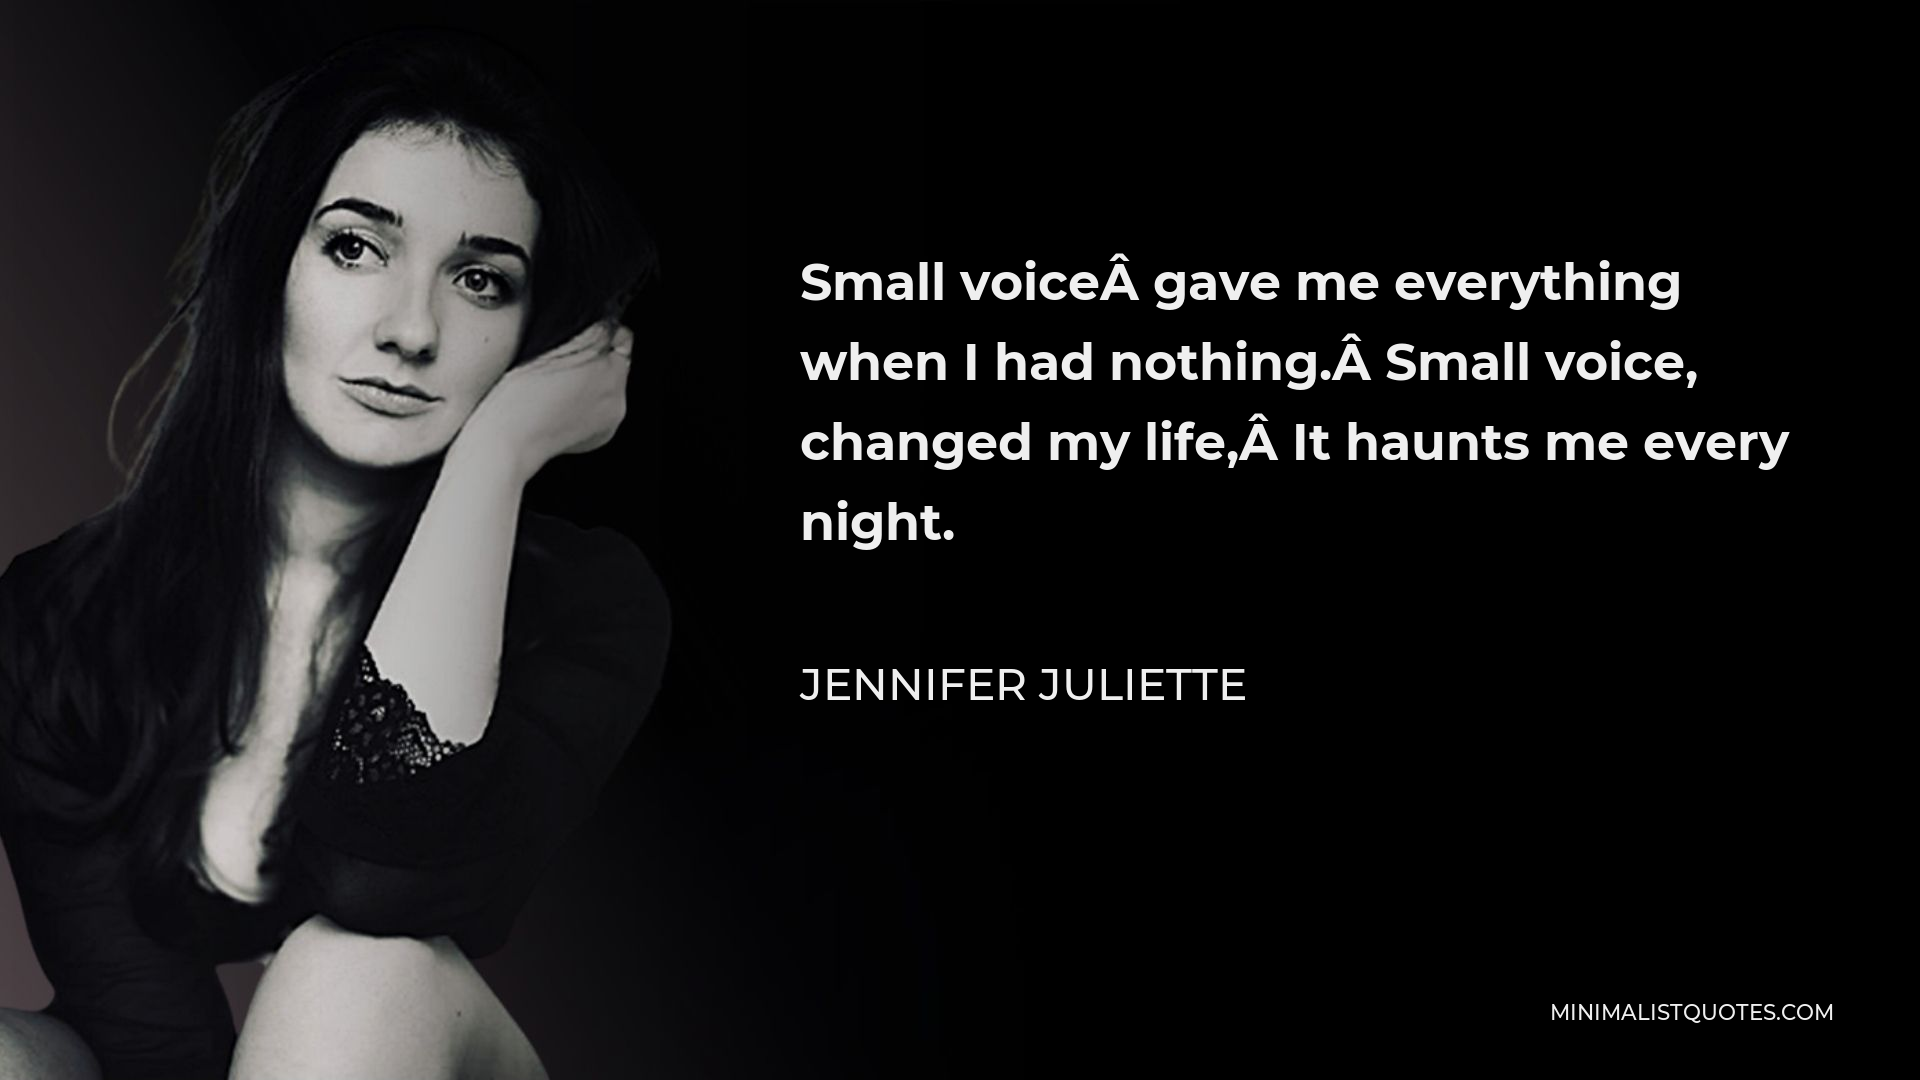 Jennifer Juliette Quote - Small voice gave me everything when I had nothing. Small voice, changed my life, It haunts me every night.